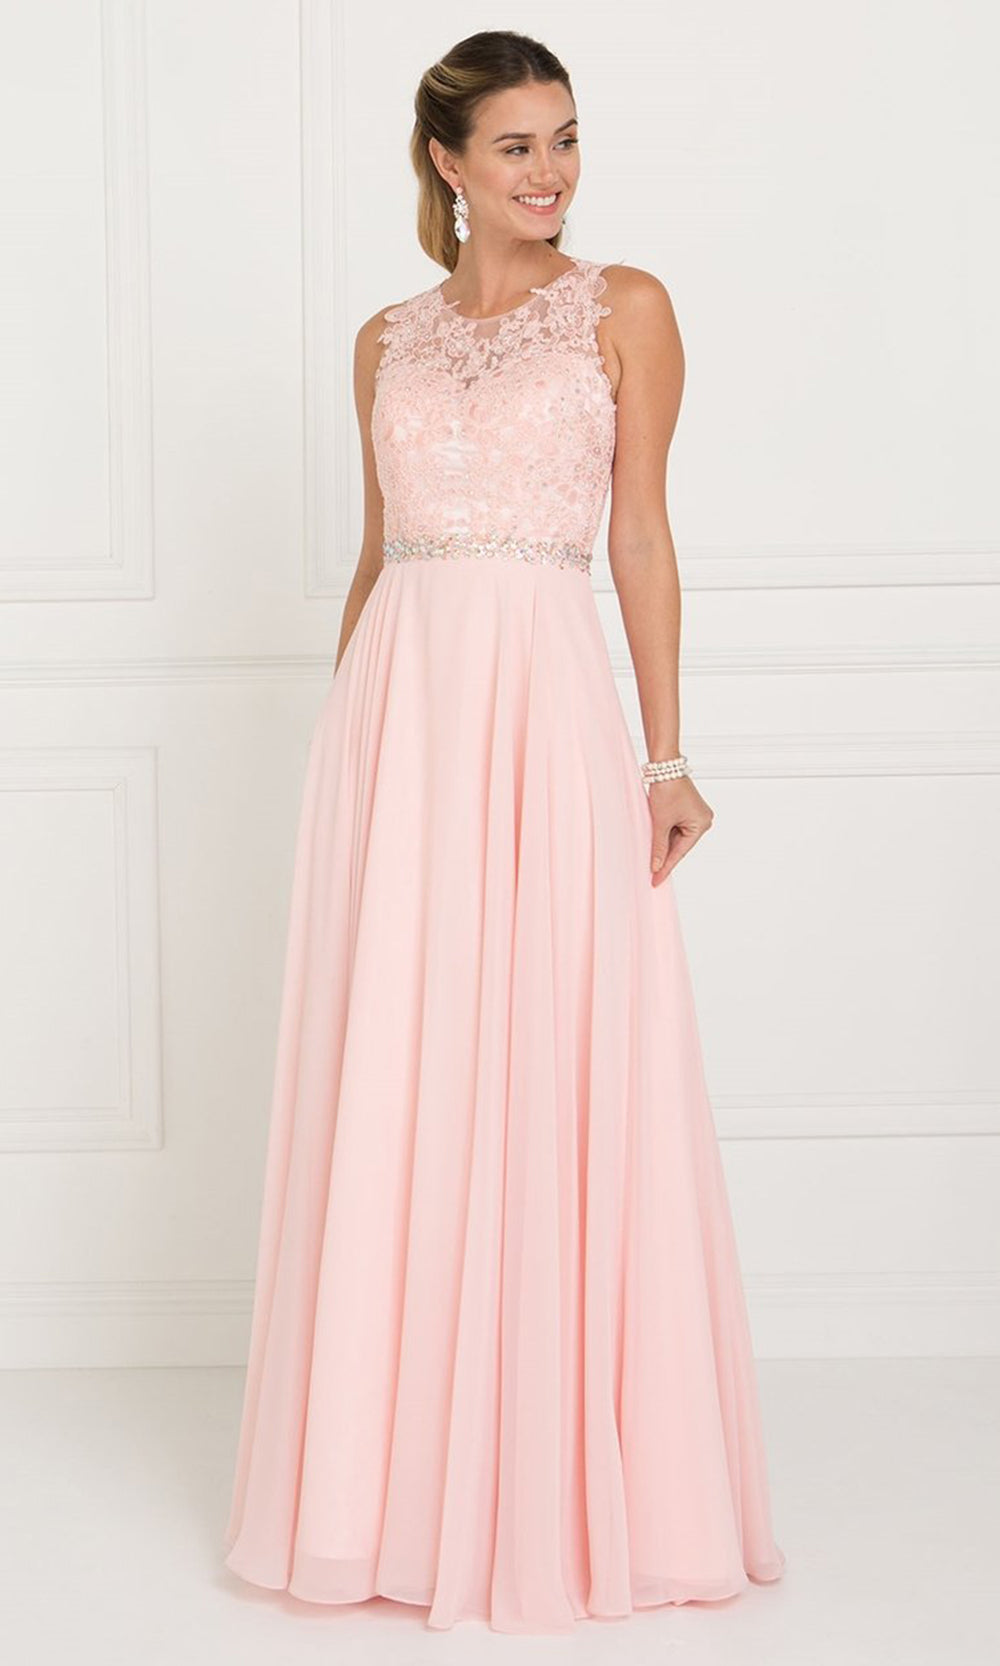 Elizabeth K - Illusion Jewel Embellished Lace A-Line Gown GL2417 - 1 pc Blush In Size 2XL Available CCSALE 2XL / Blush